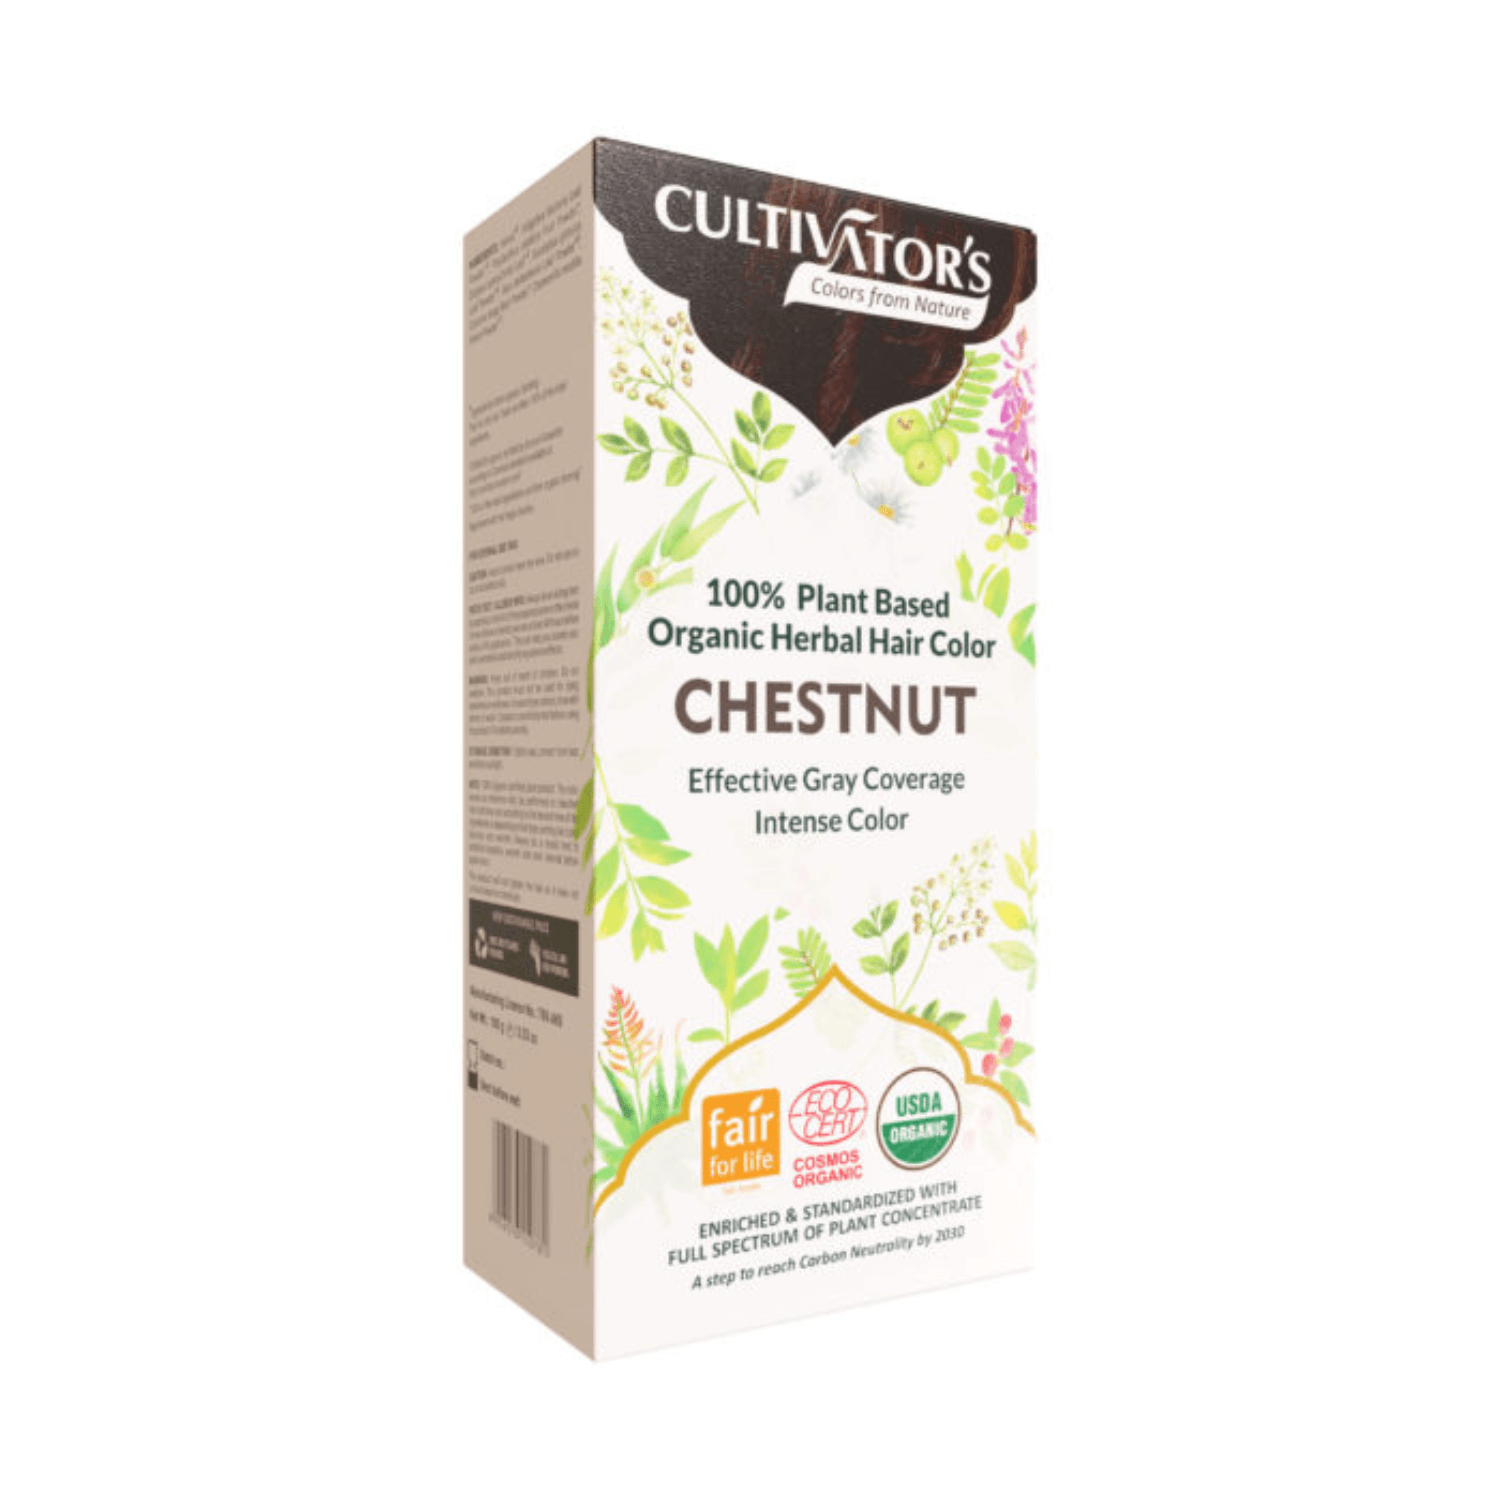 Cultivators Organic Herbal Hair Color, Chestnut